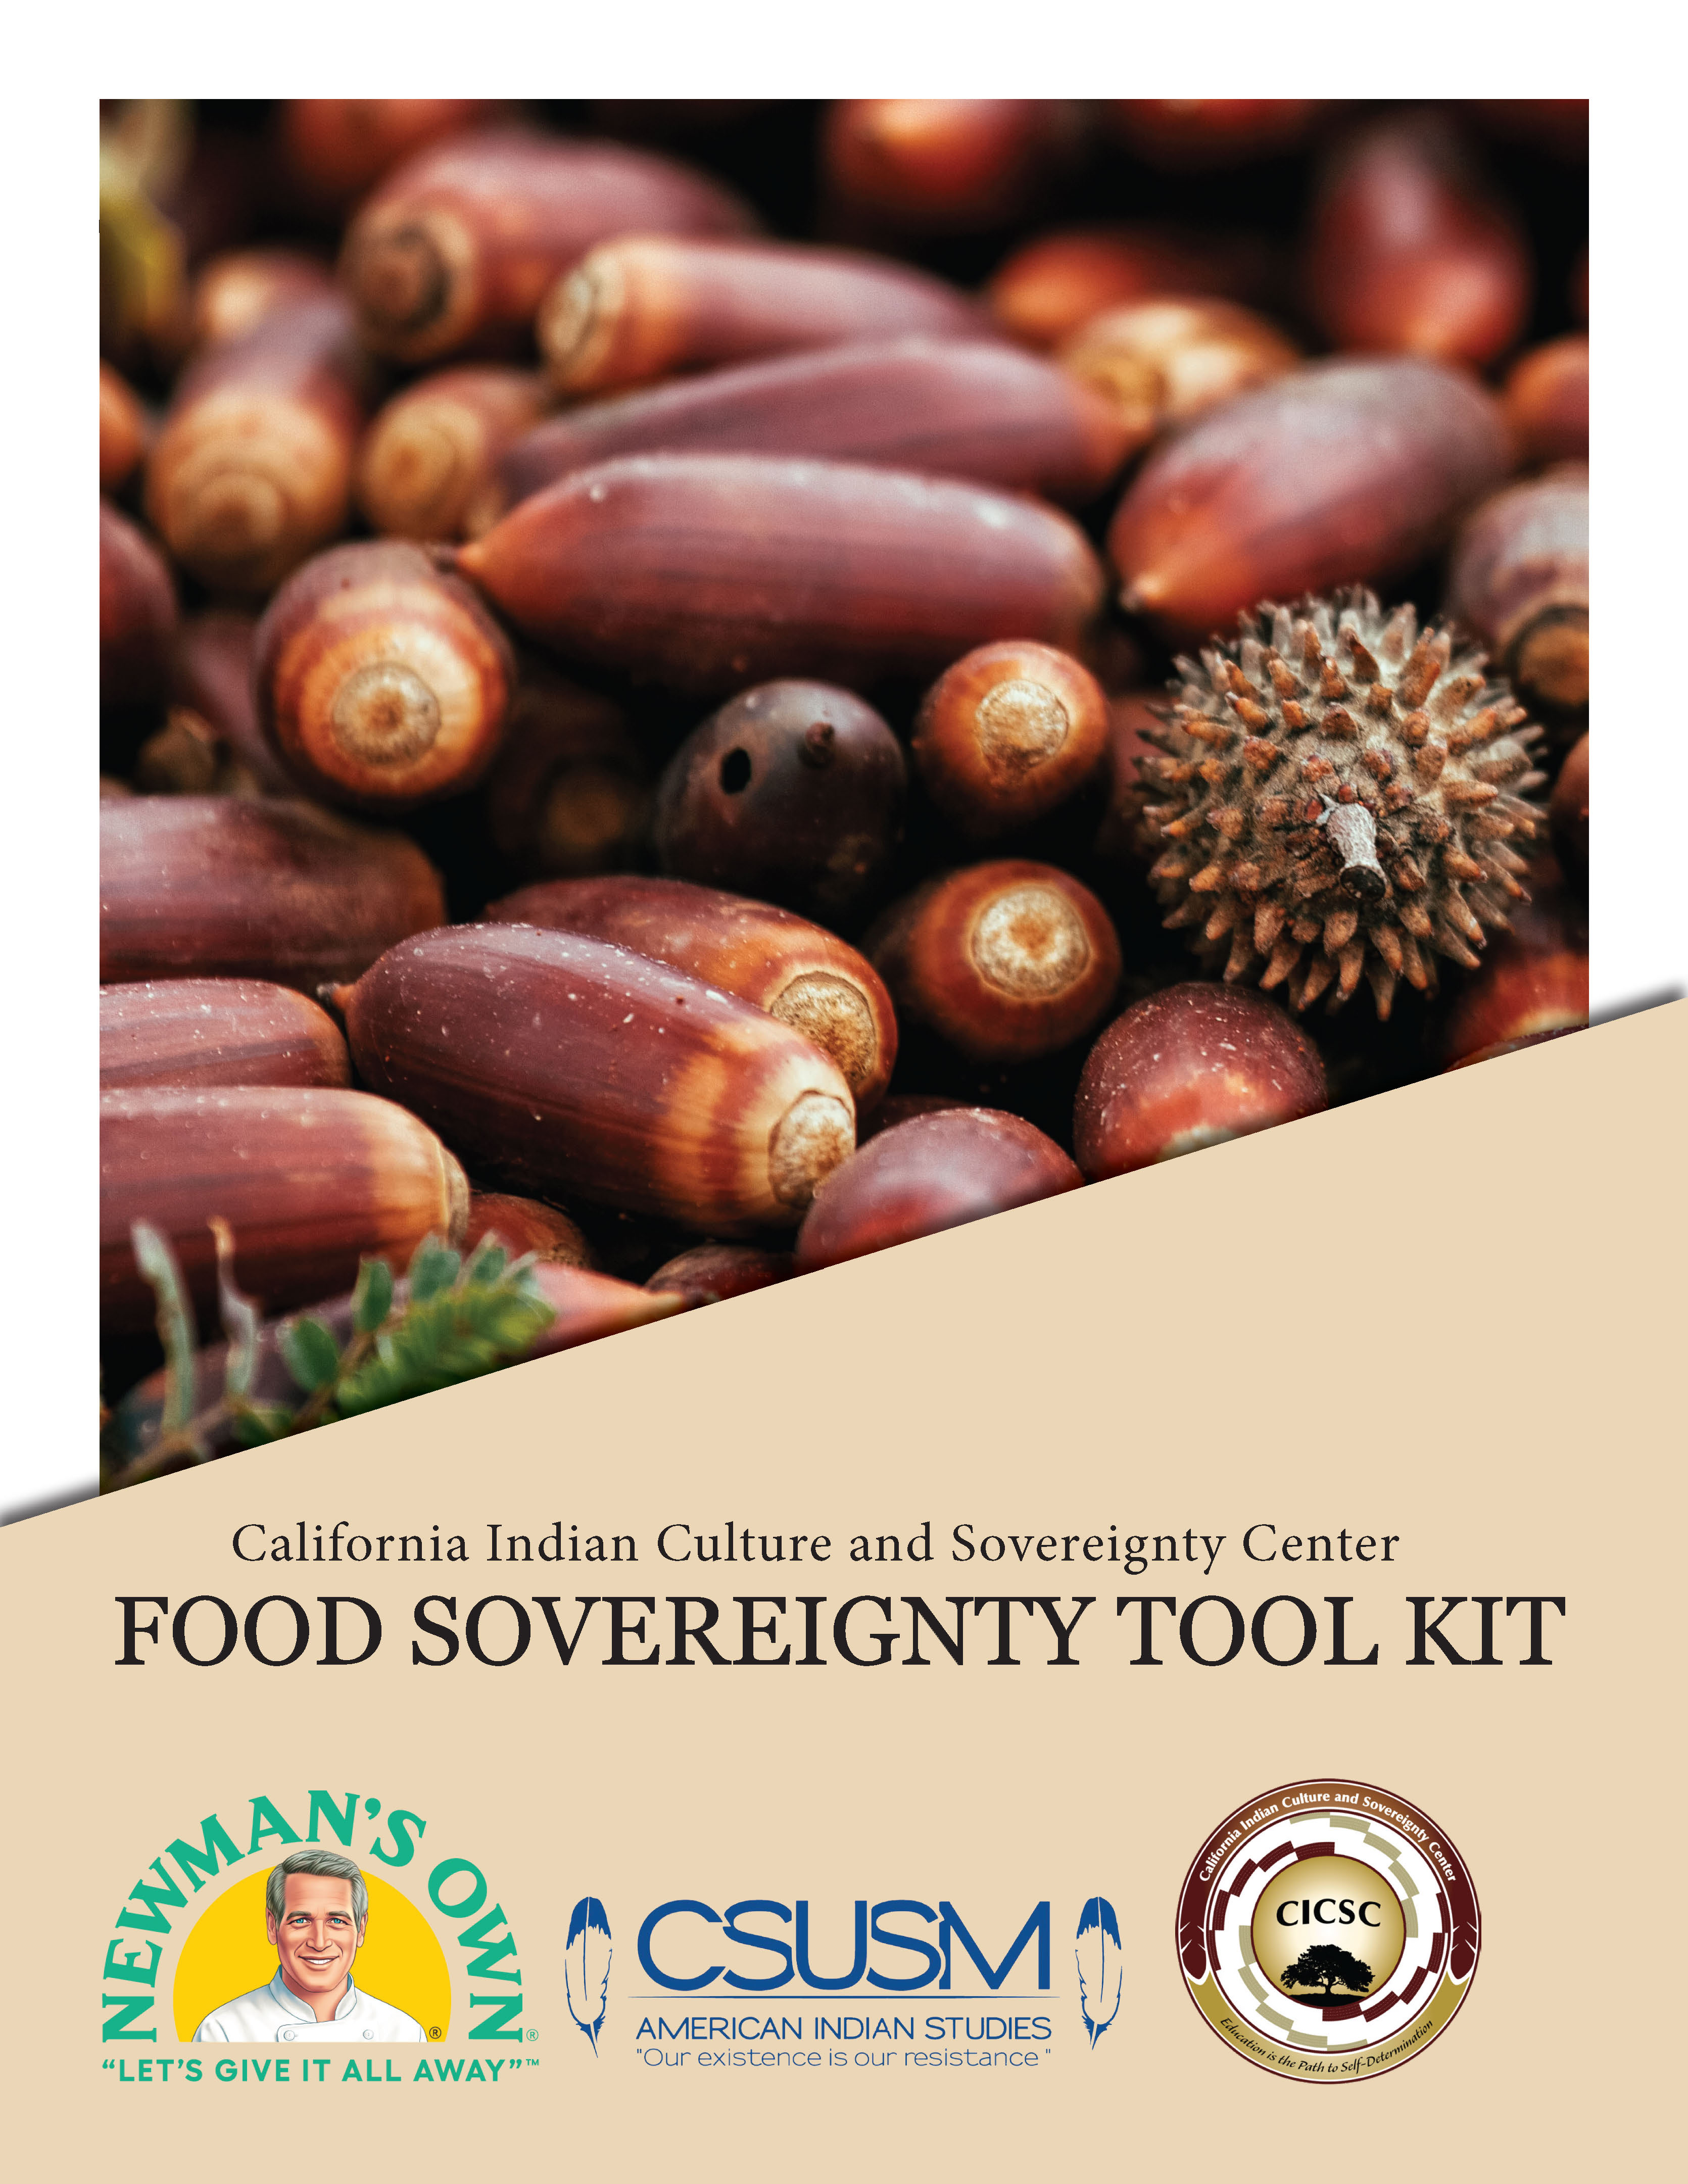 CICSC food sovereignty toolkit cover image with photo of acorn and title